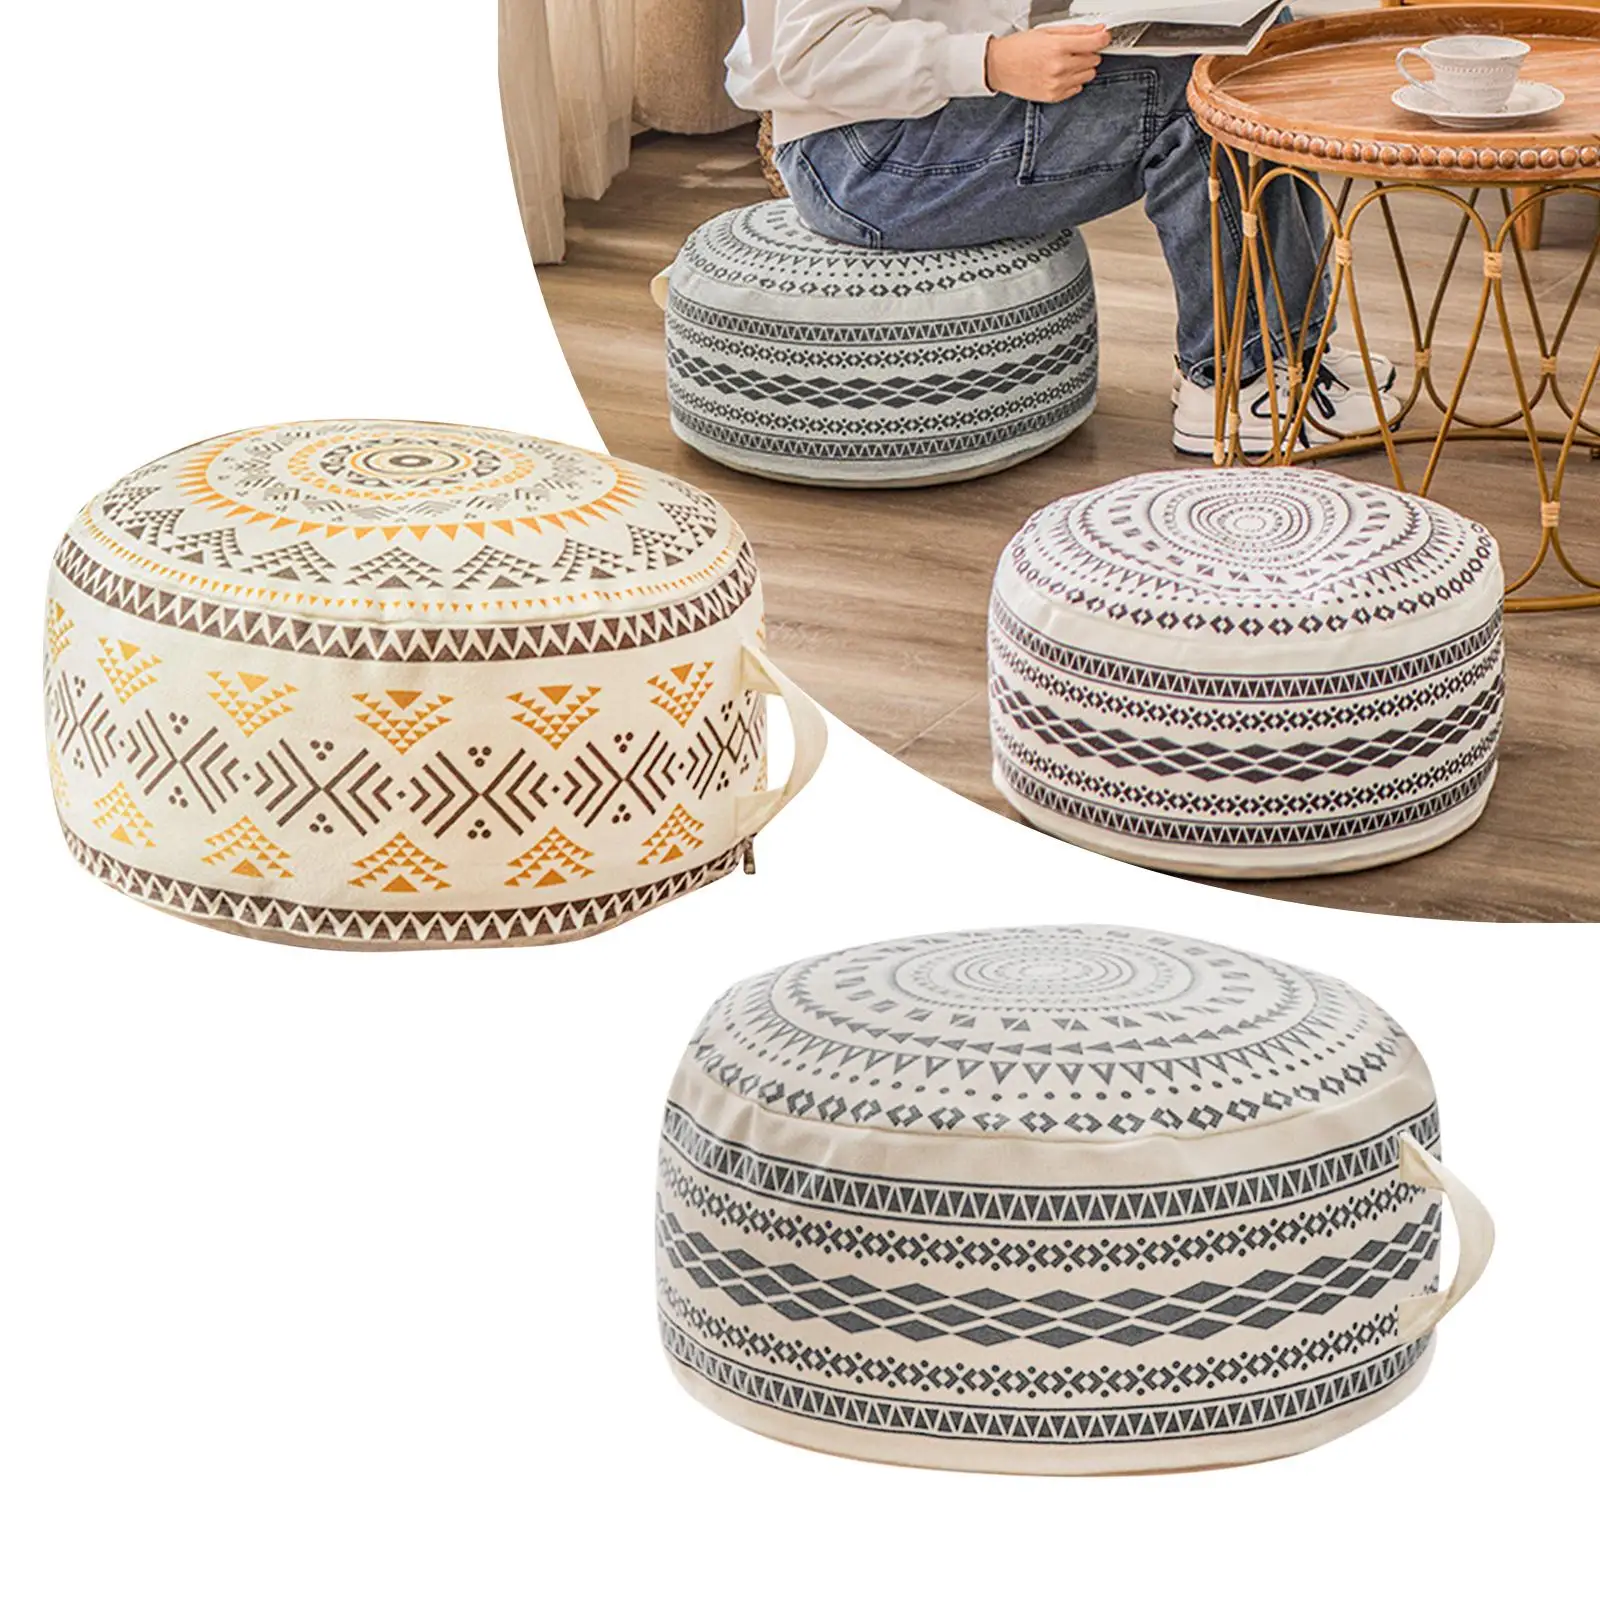 Handmade Woven Pouf Cover Embroider Craft Bedroom Decor Decorative Floor Cushion Seat Unstuffed Footstool Cover Chair